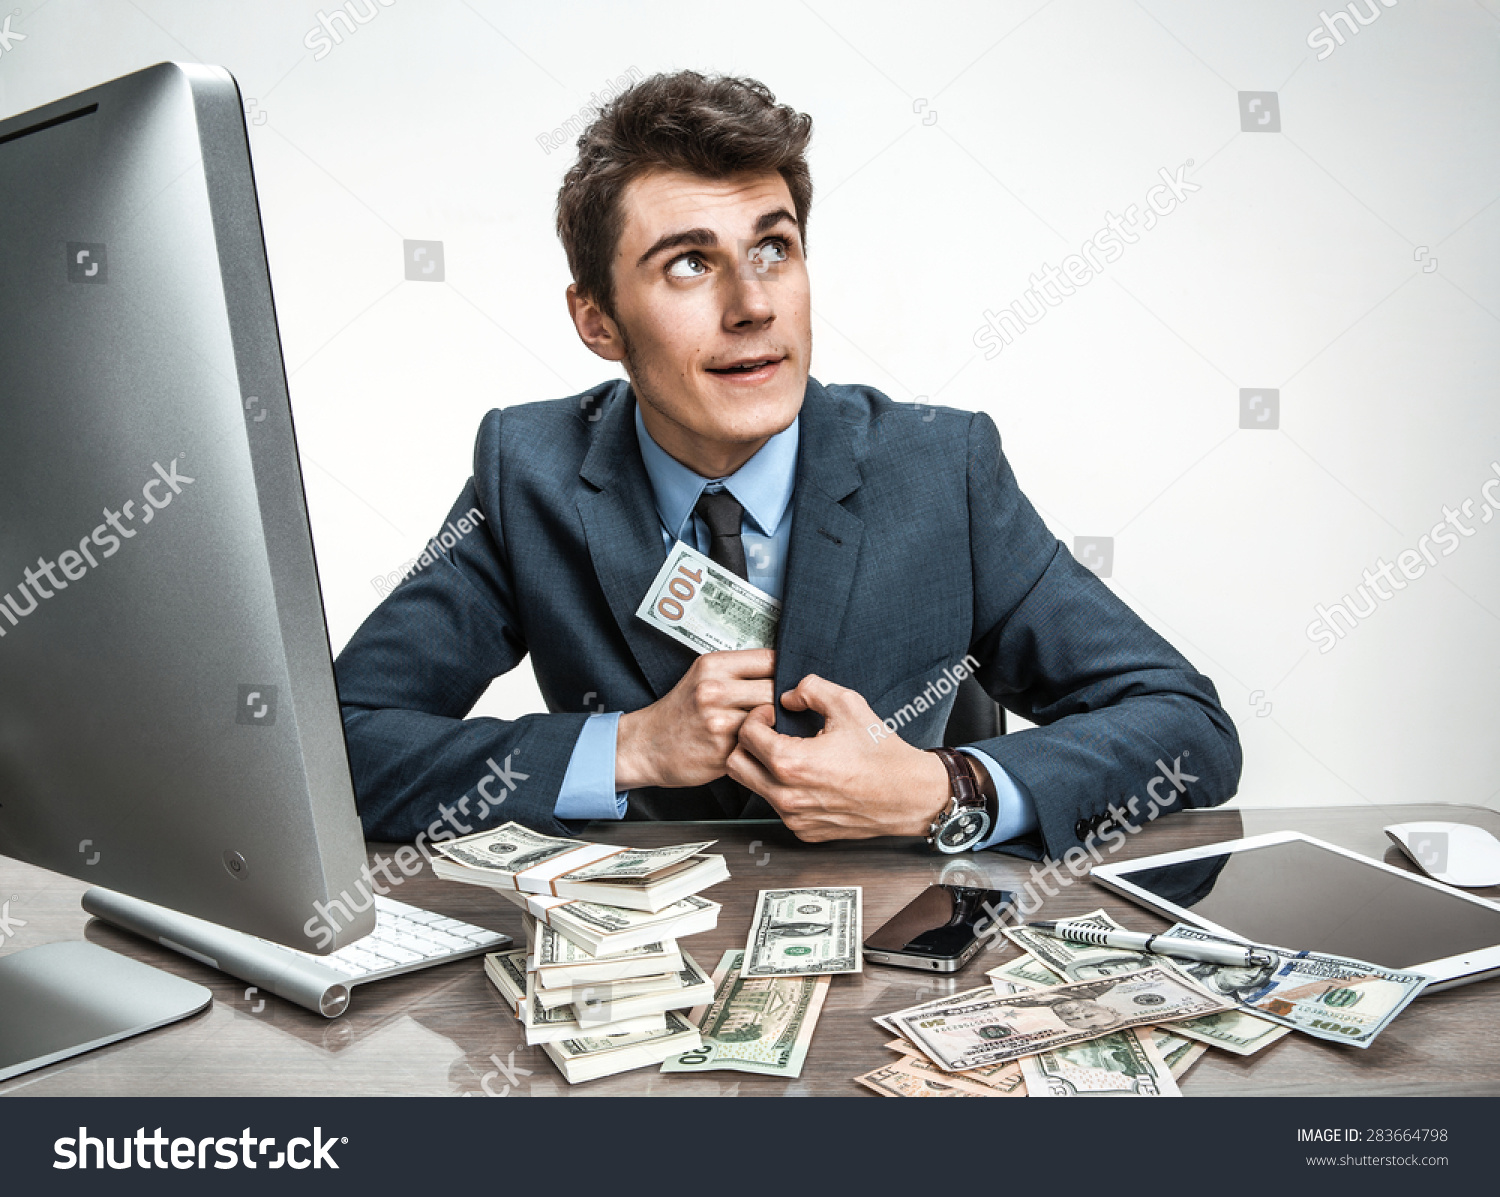 Government Official Stealing Money Taxpayers Stock Photo (Edit Now)  283664798